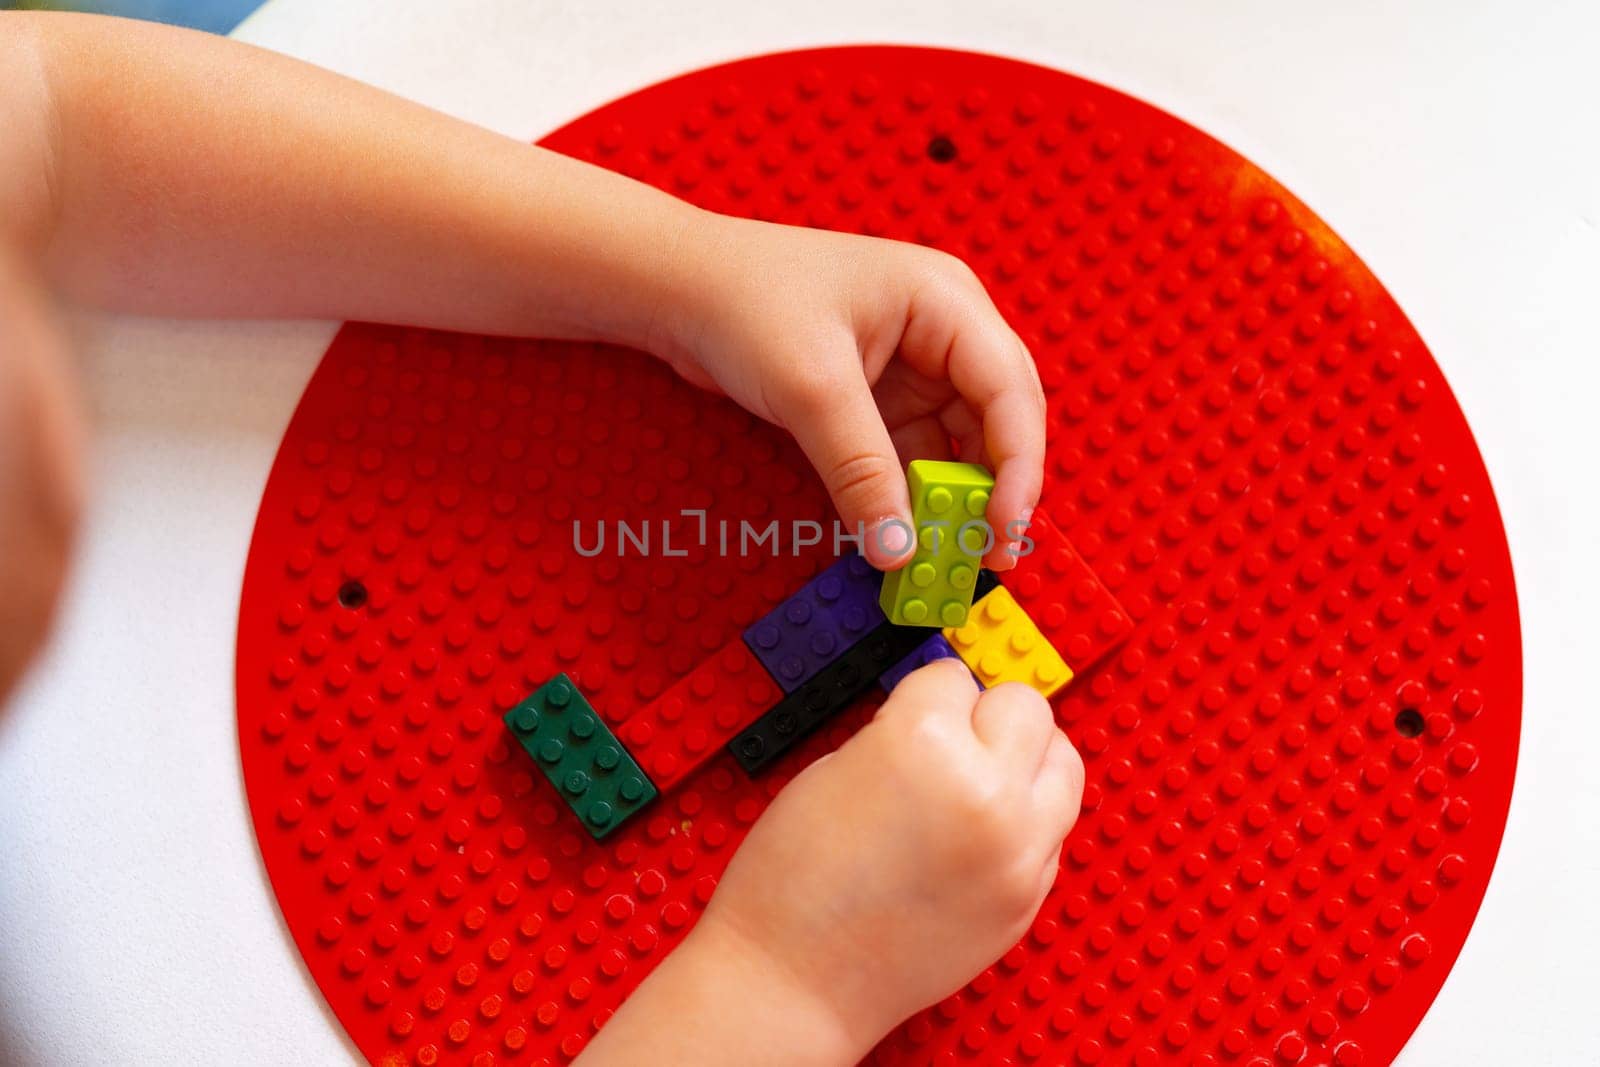 A young child is deeply focused while constructing a design with colorful plastic building blocks on a round red base. The childs hands are precisely placing a blue block to continue the pattern they have started, indicating an exercise in fine motor skills and creativity.